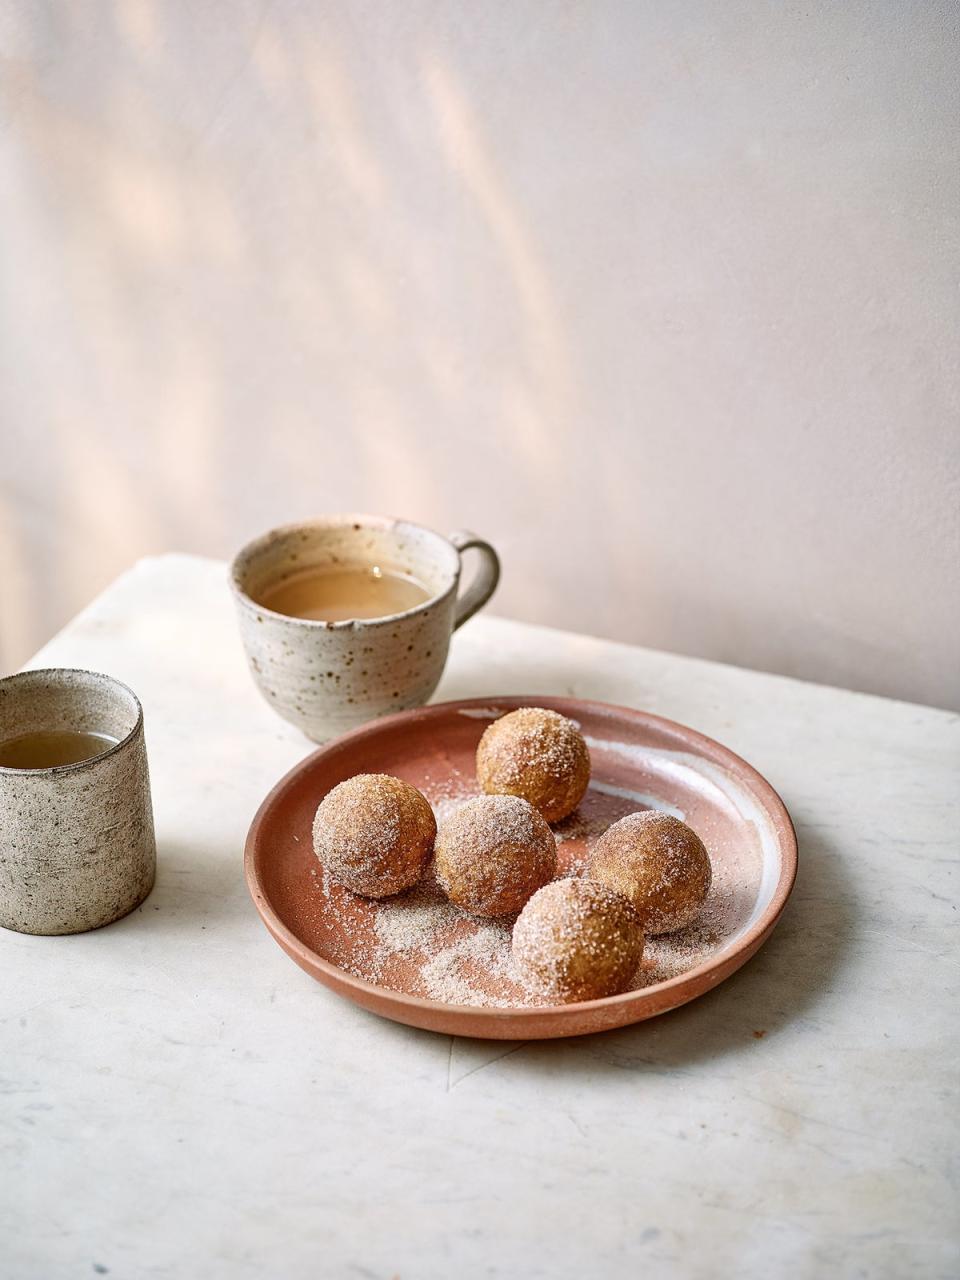 Dust these doughnuts with a sprinkling of cinnamon sugar (PA)